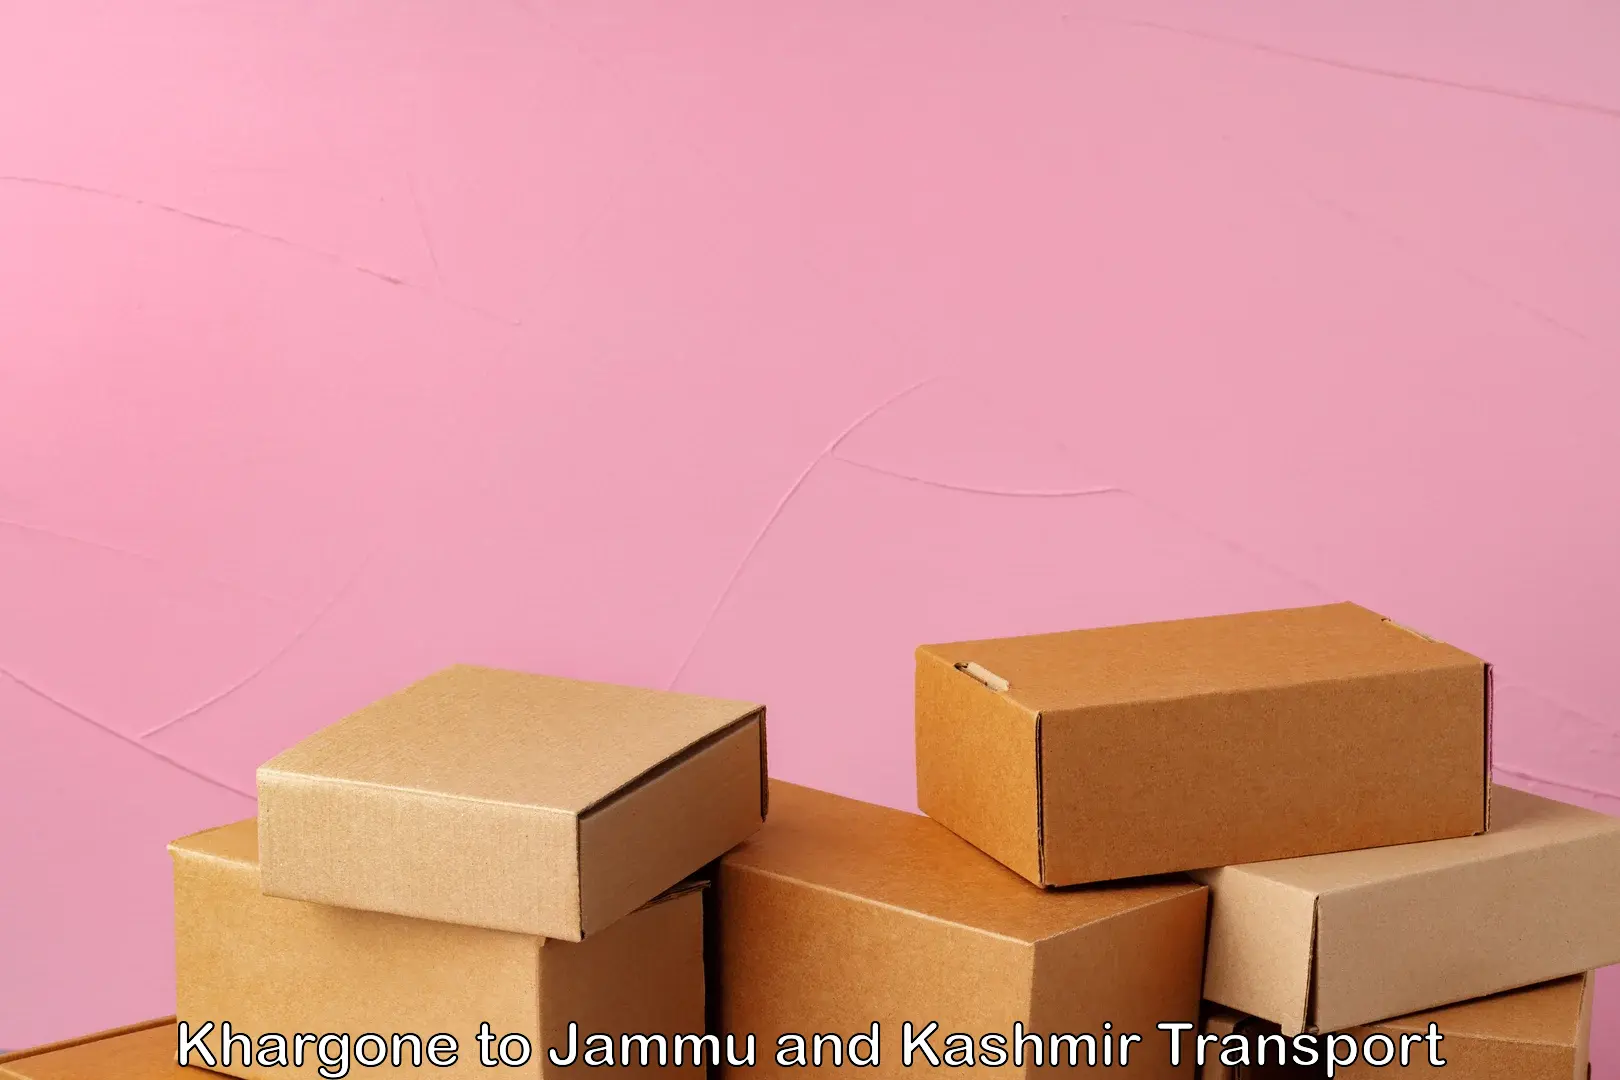 Container transport service Khargone to Jammu and Kashmir